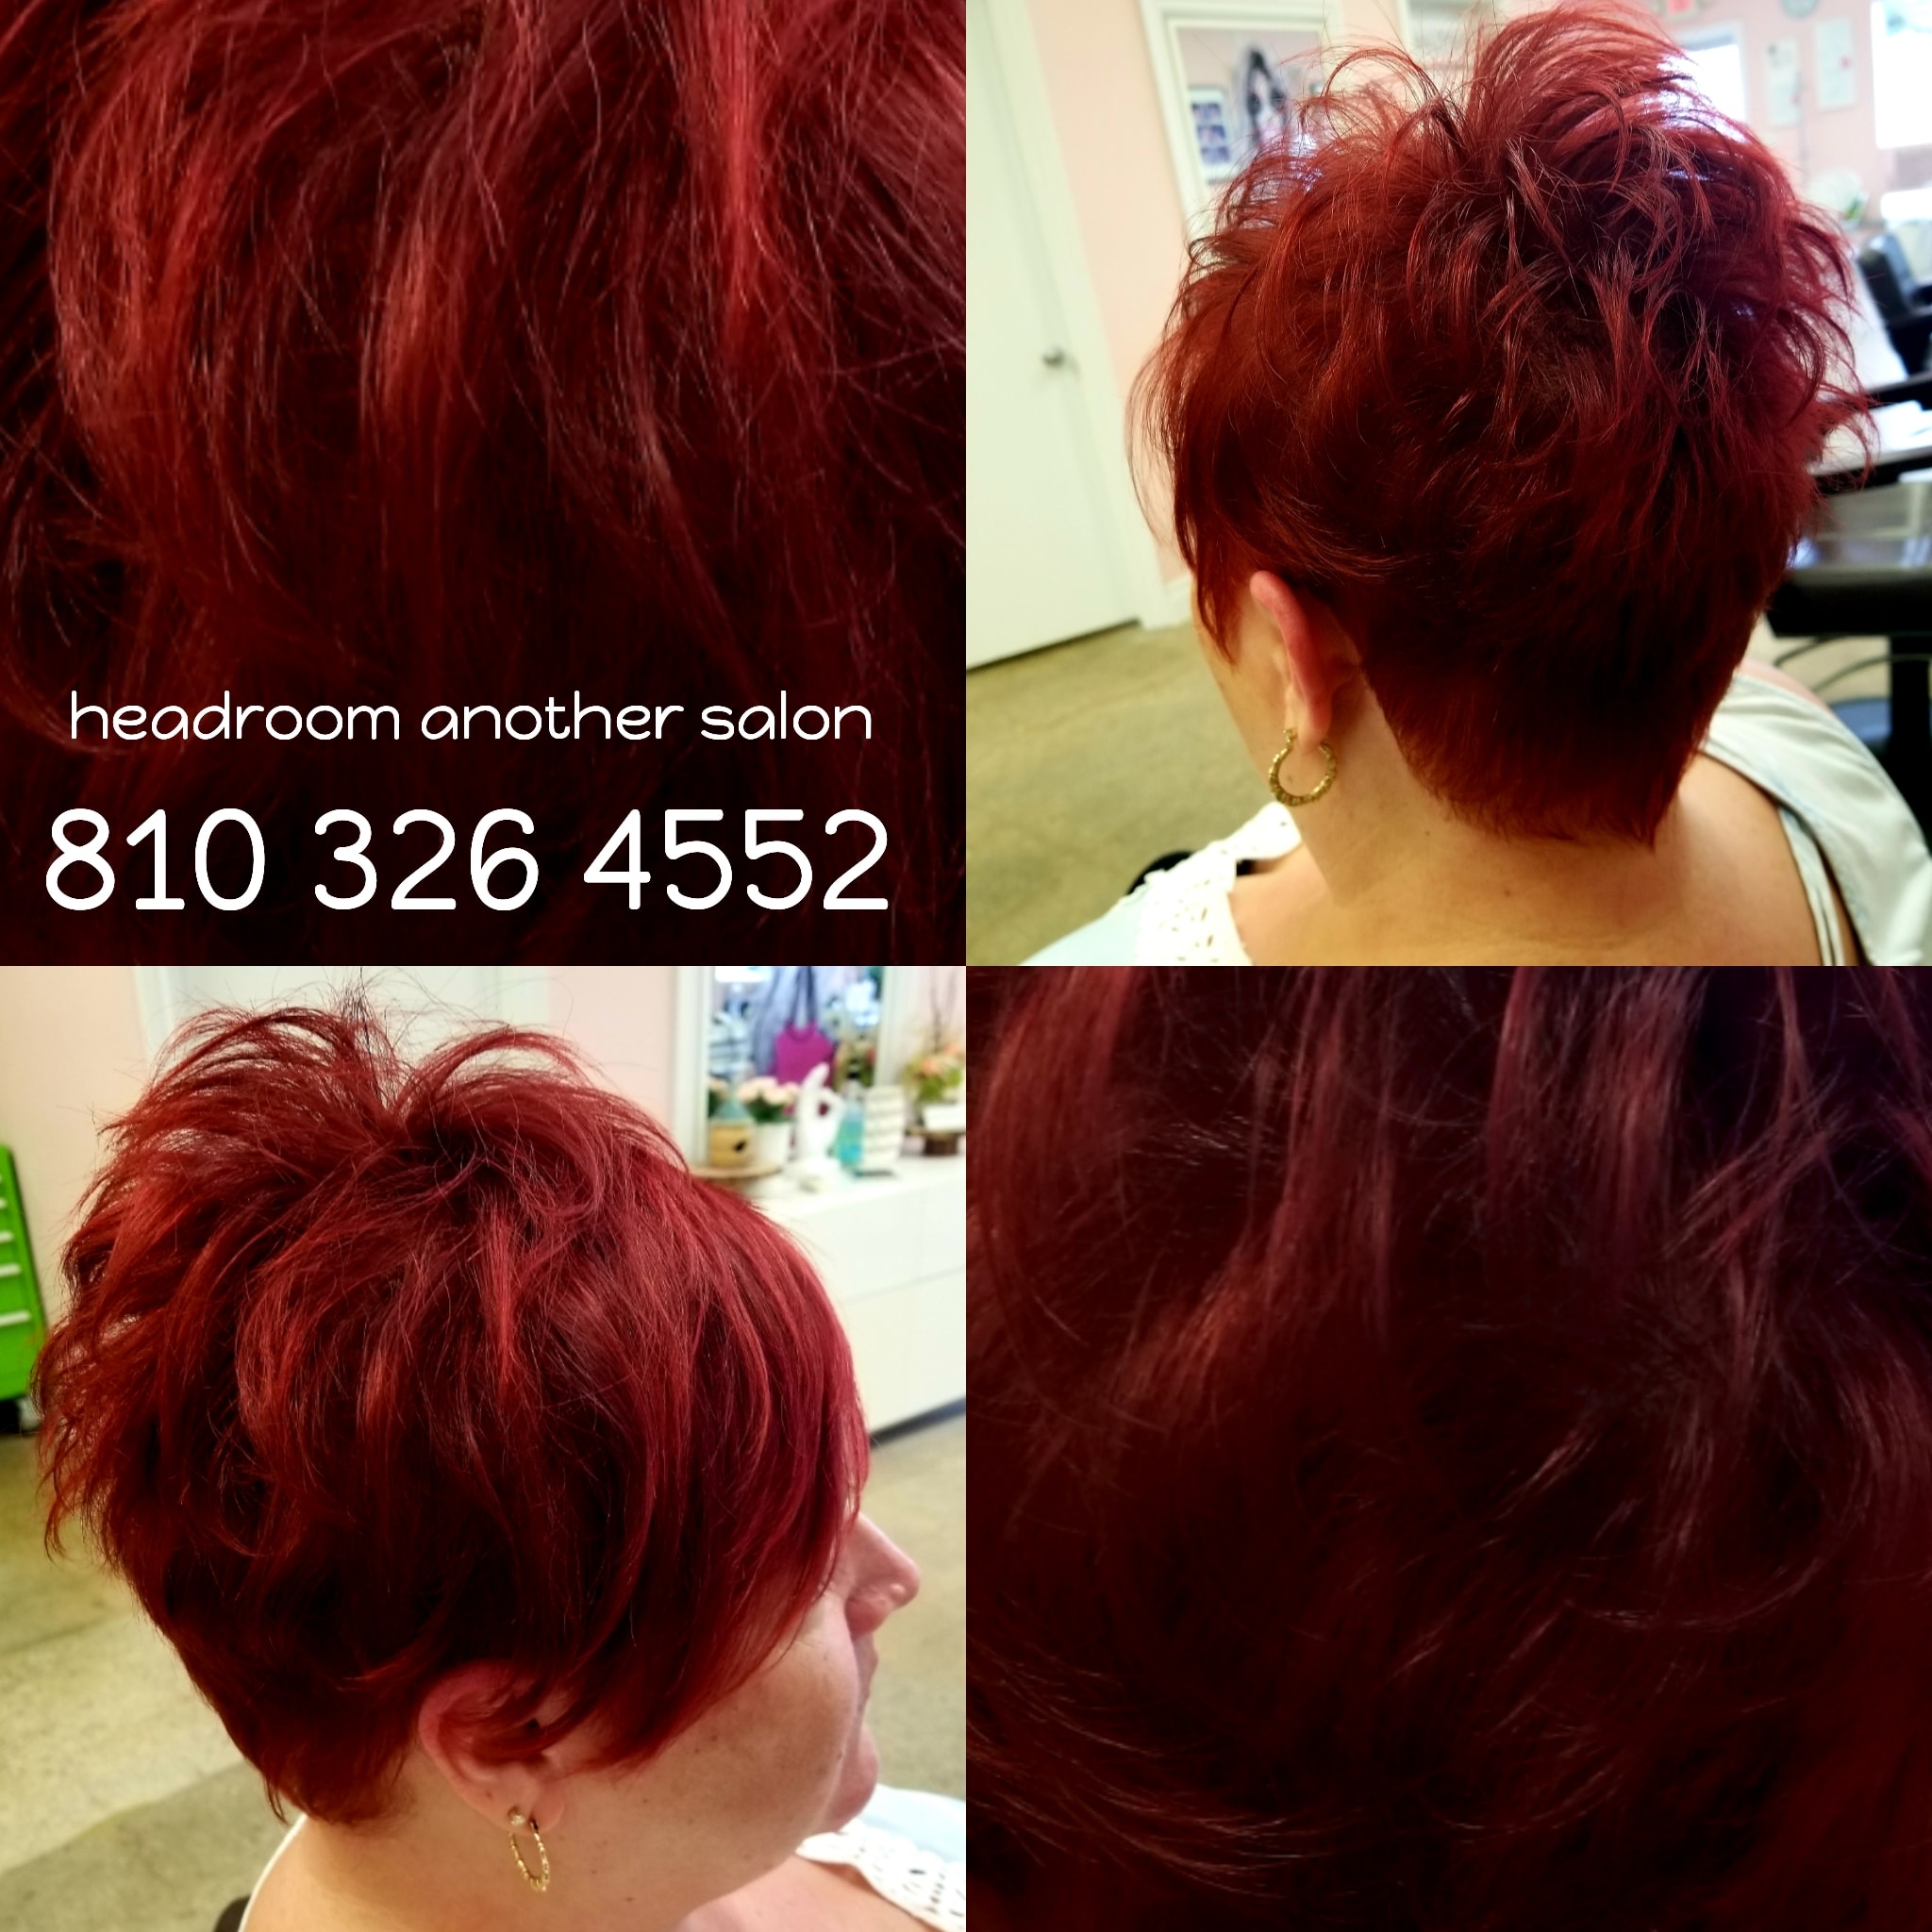 Headroom-Another Salon 201 N Riverside Ave, St Clair Michigan 48079